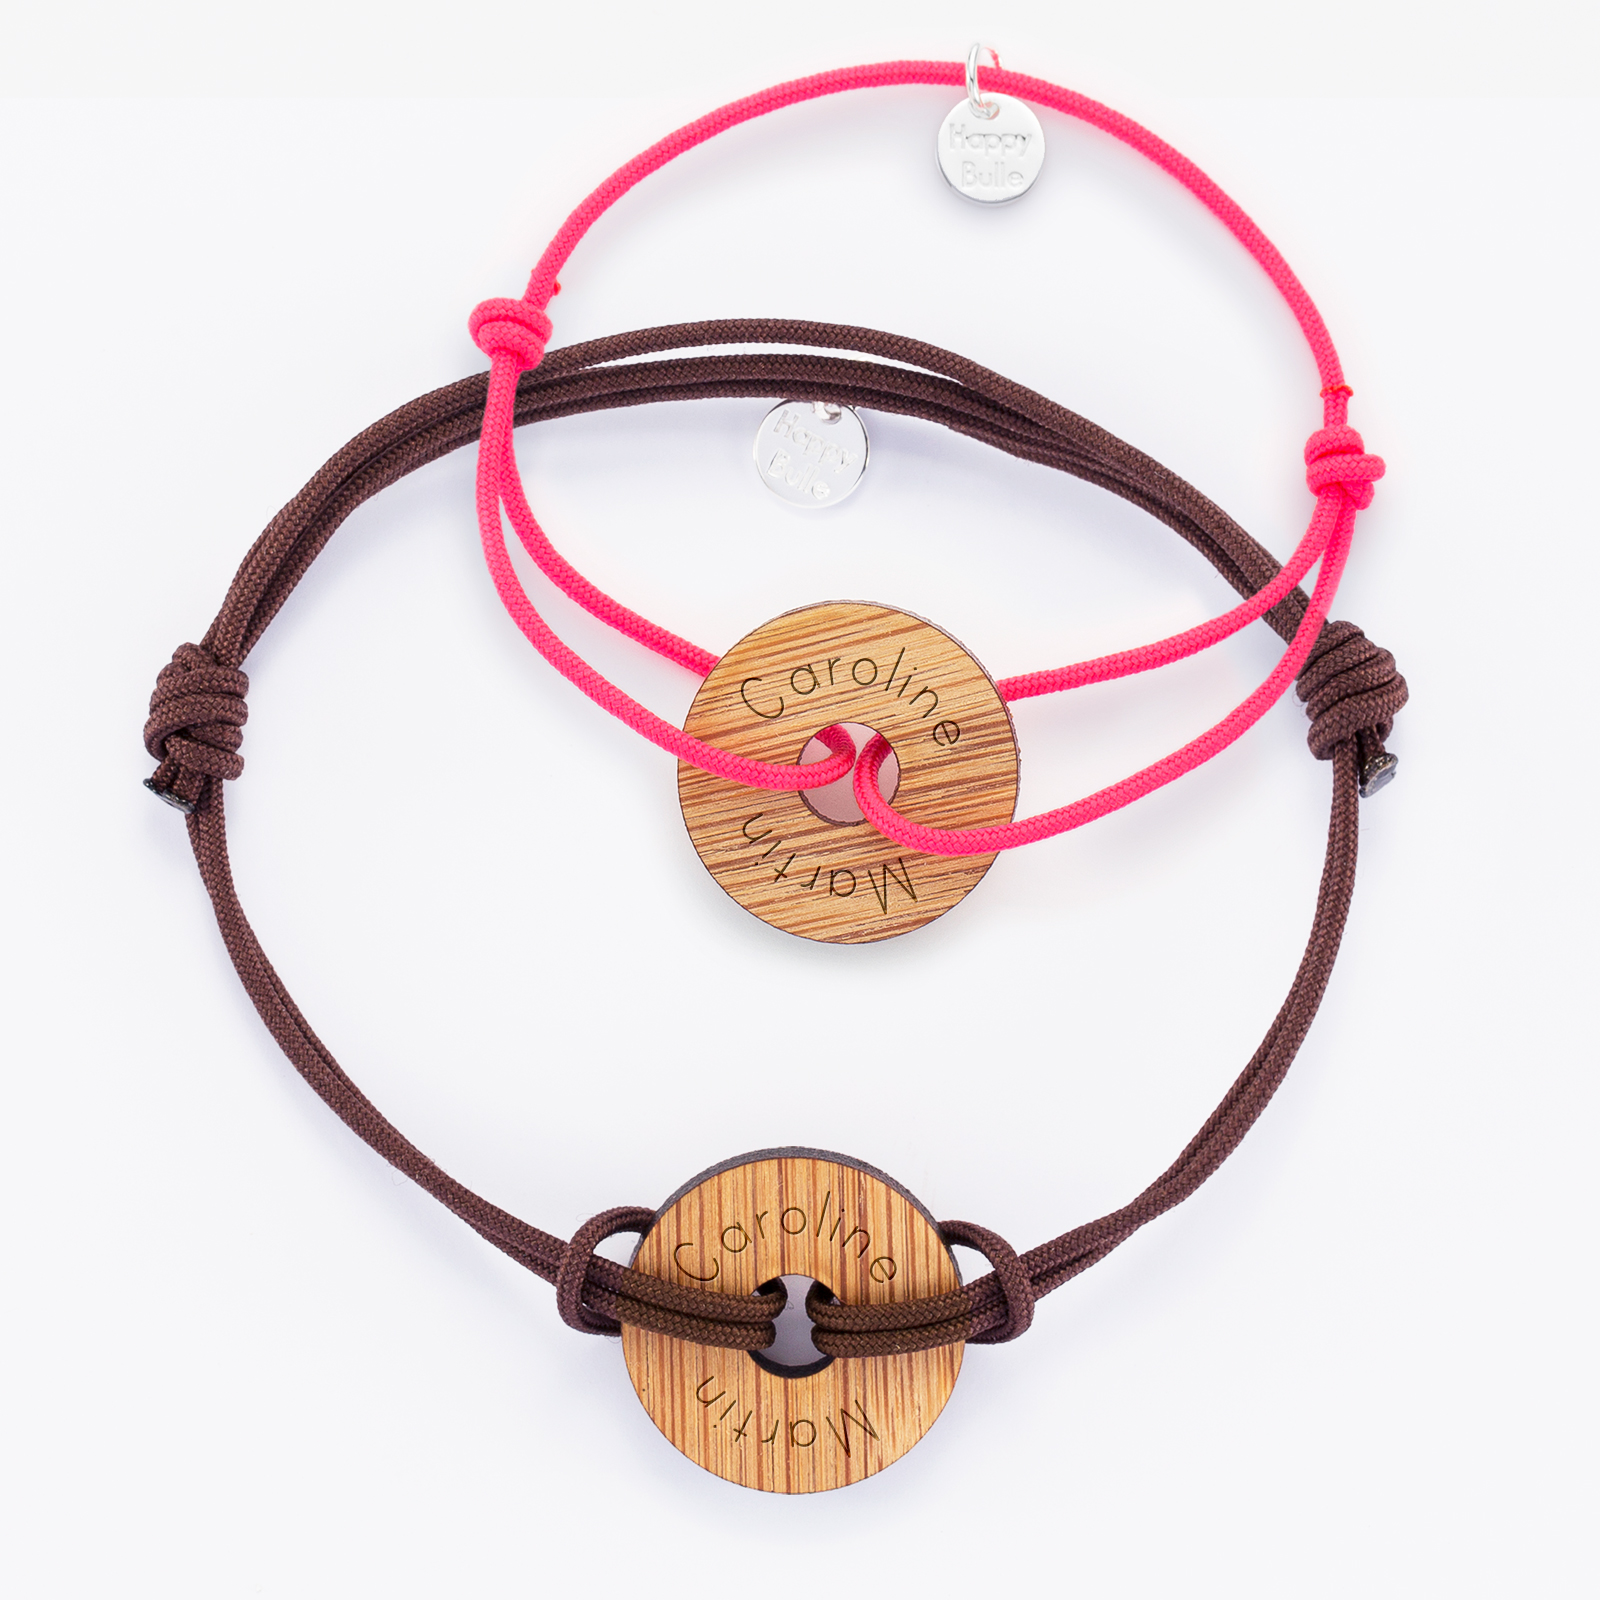 Pair of personalised bracelets with engraved target wooden medallions 21mm